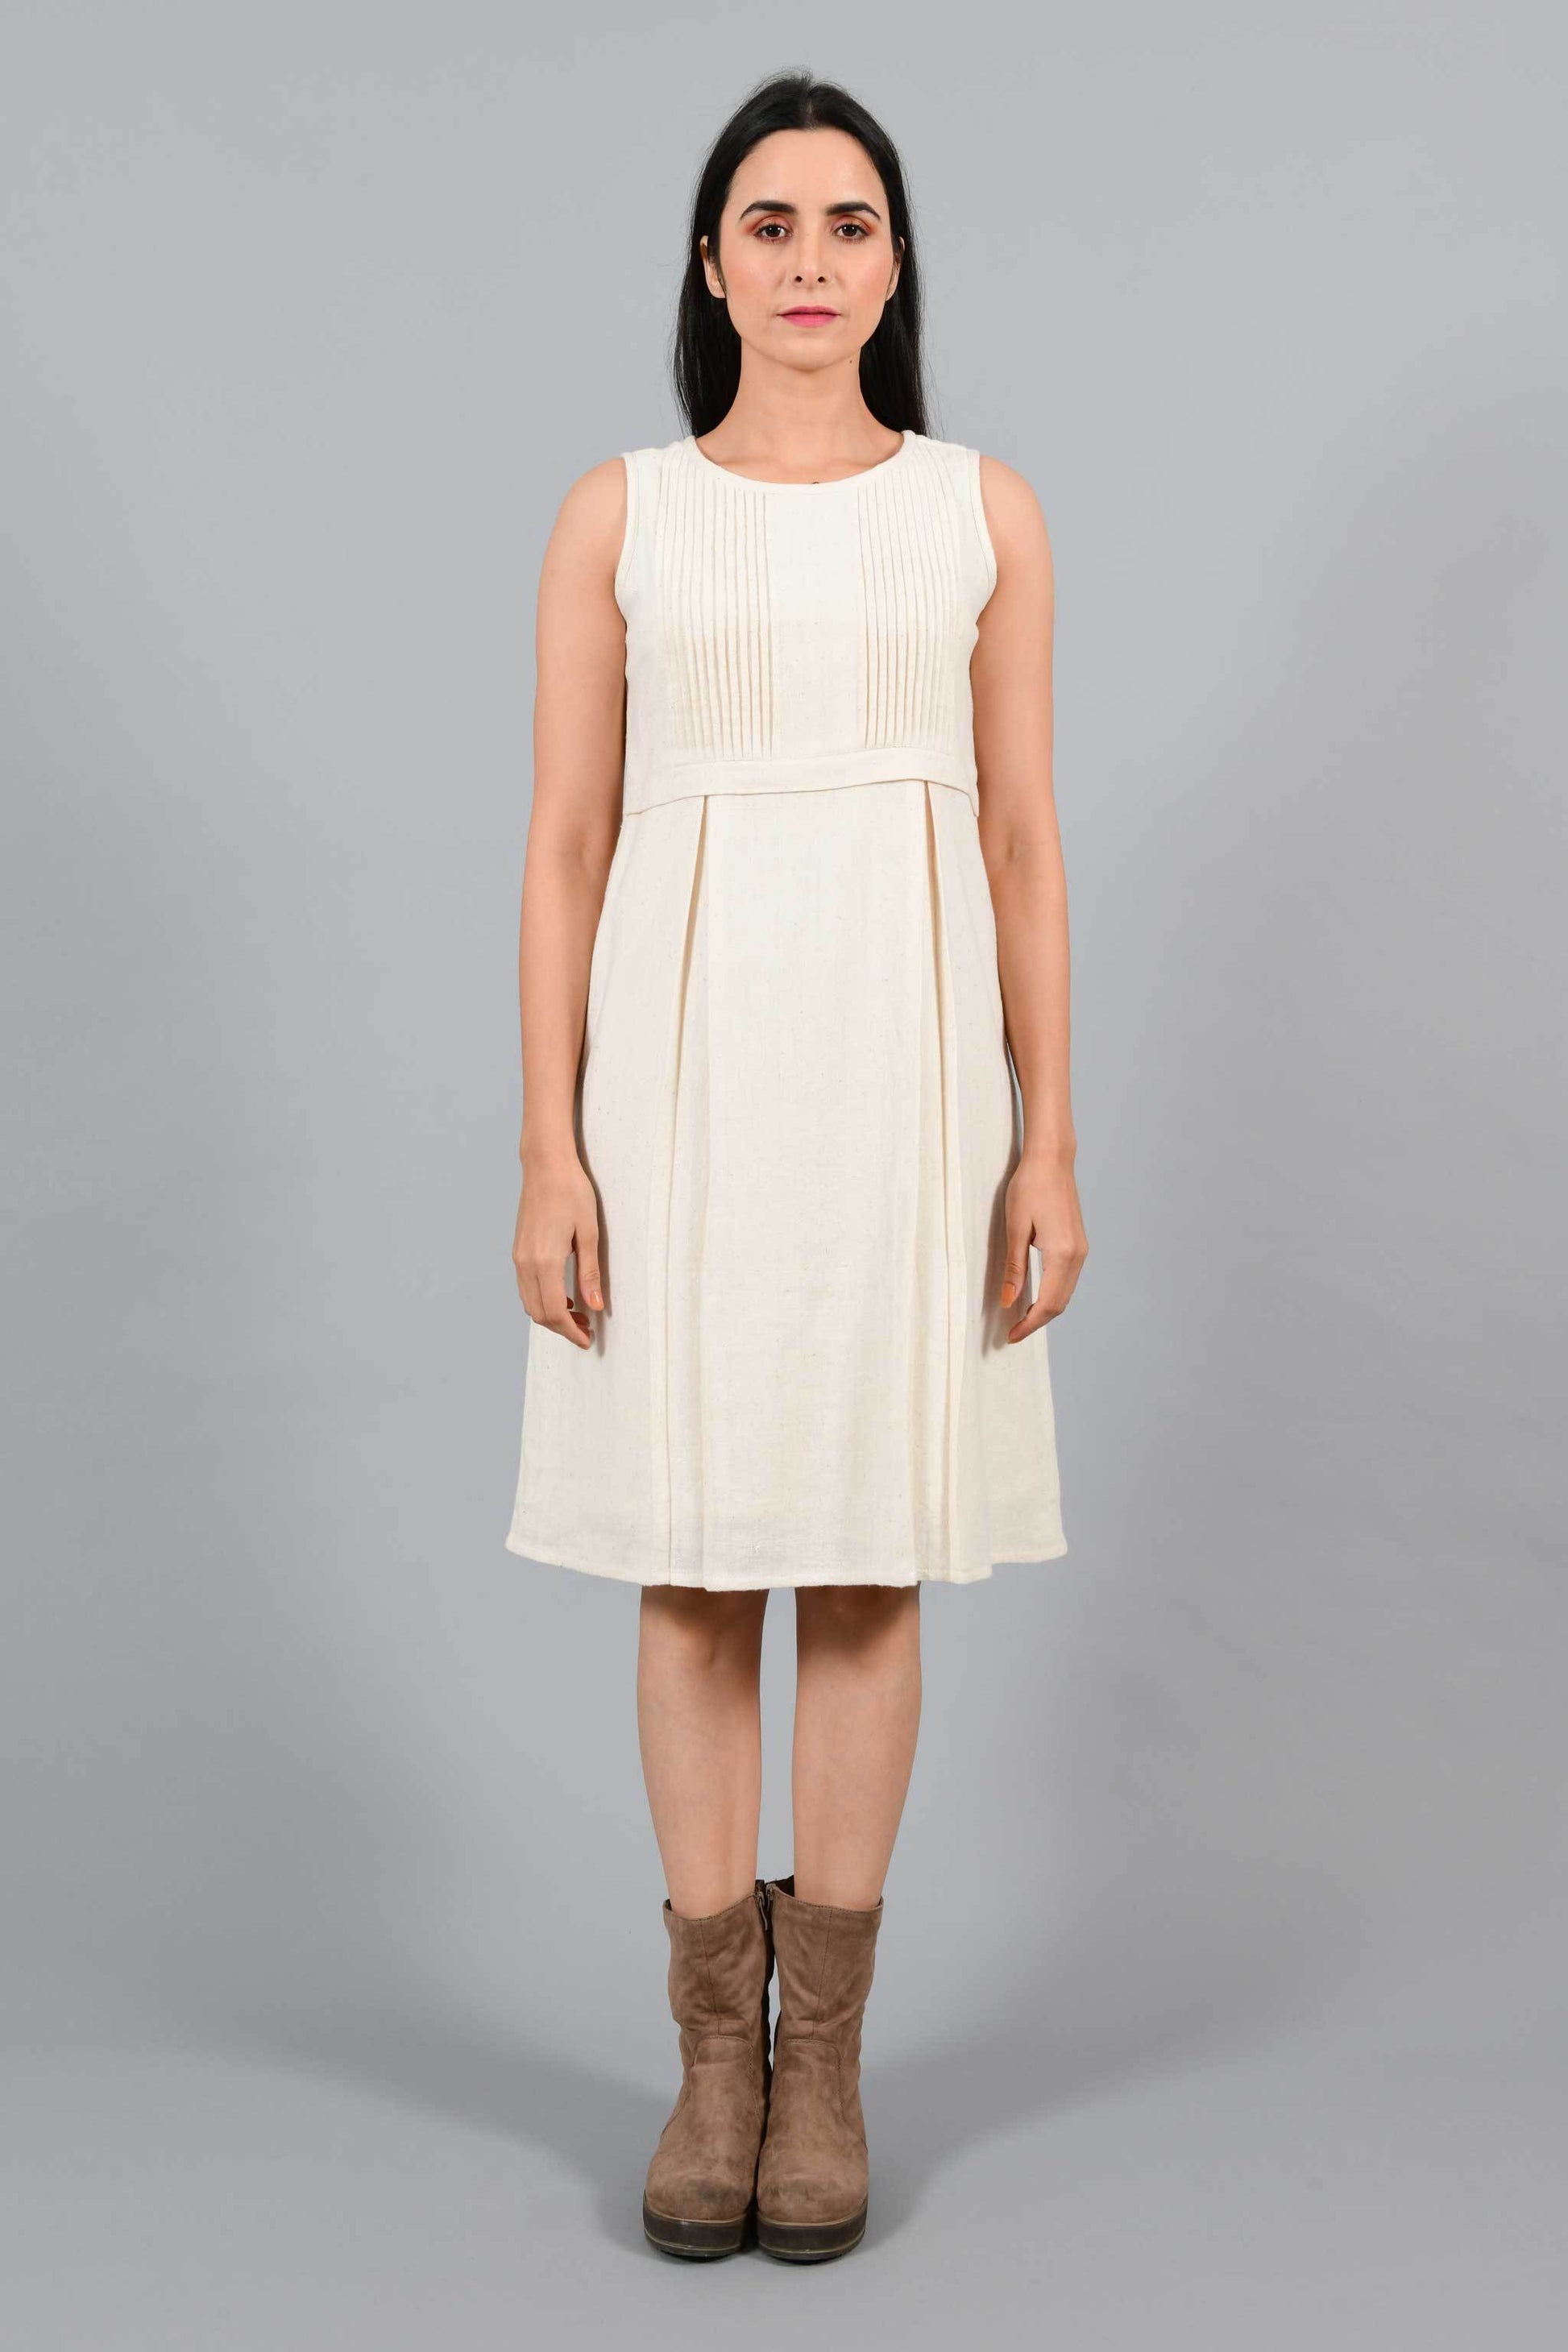 Front pose of an Indian female womenswear fashion model in an off-white Cashmere Cotton Pleated Dress made using handspun and handwoven khadi cotton by Cotton Rack.